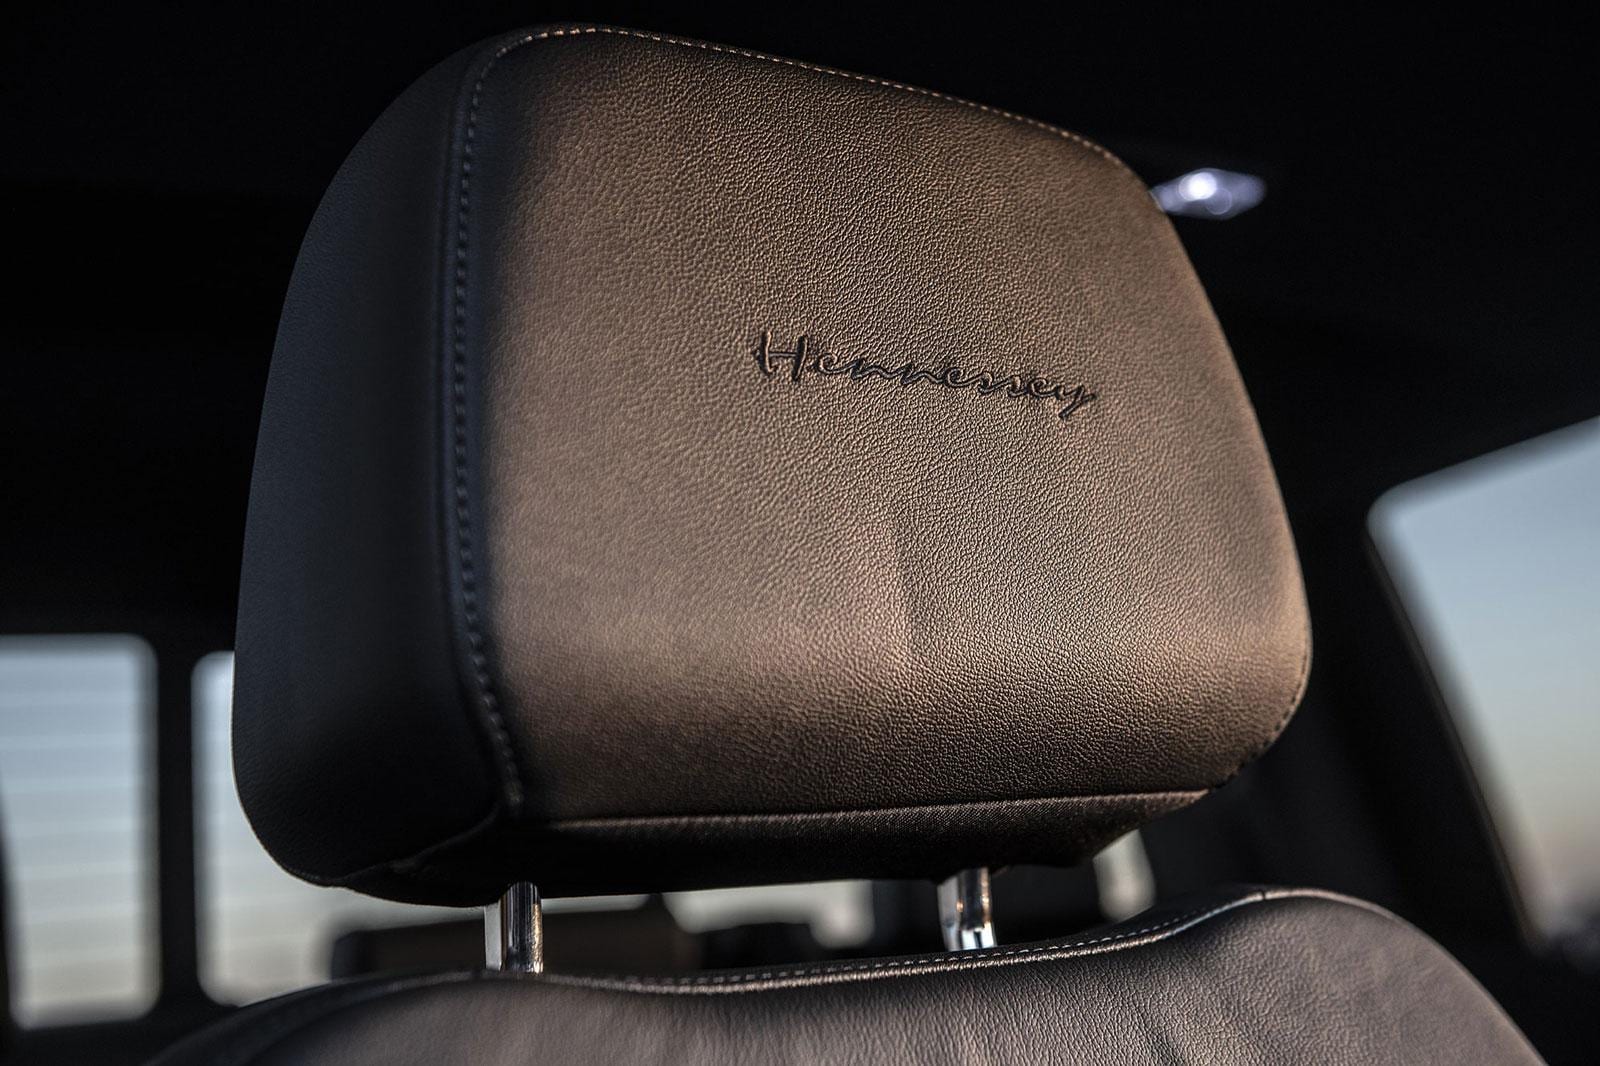 Detail of Hennessey embroidered headrest in a black Chevy Silverado